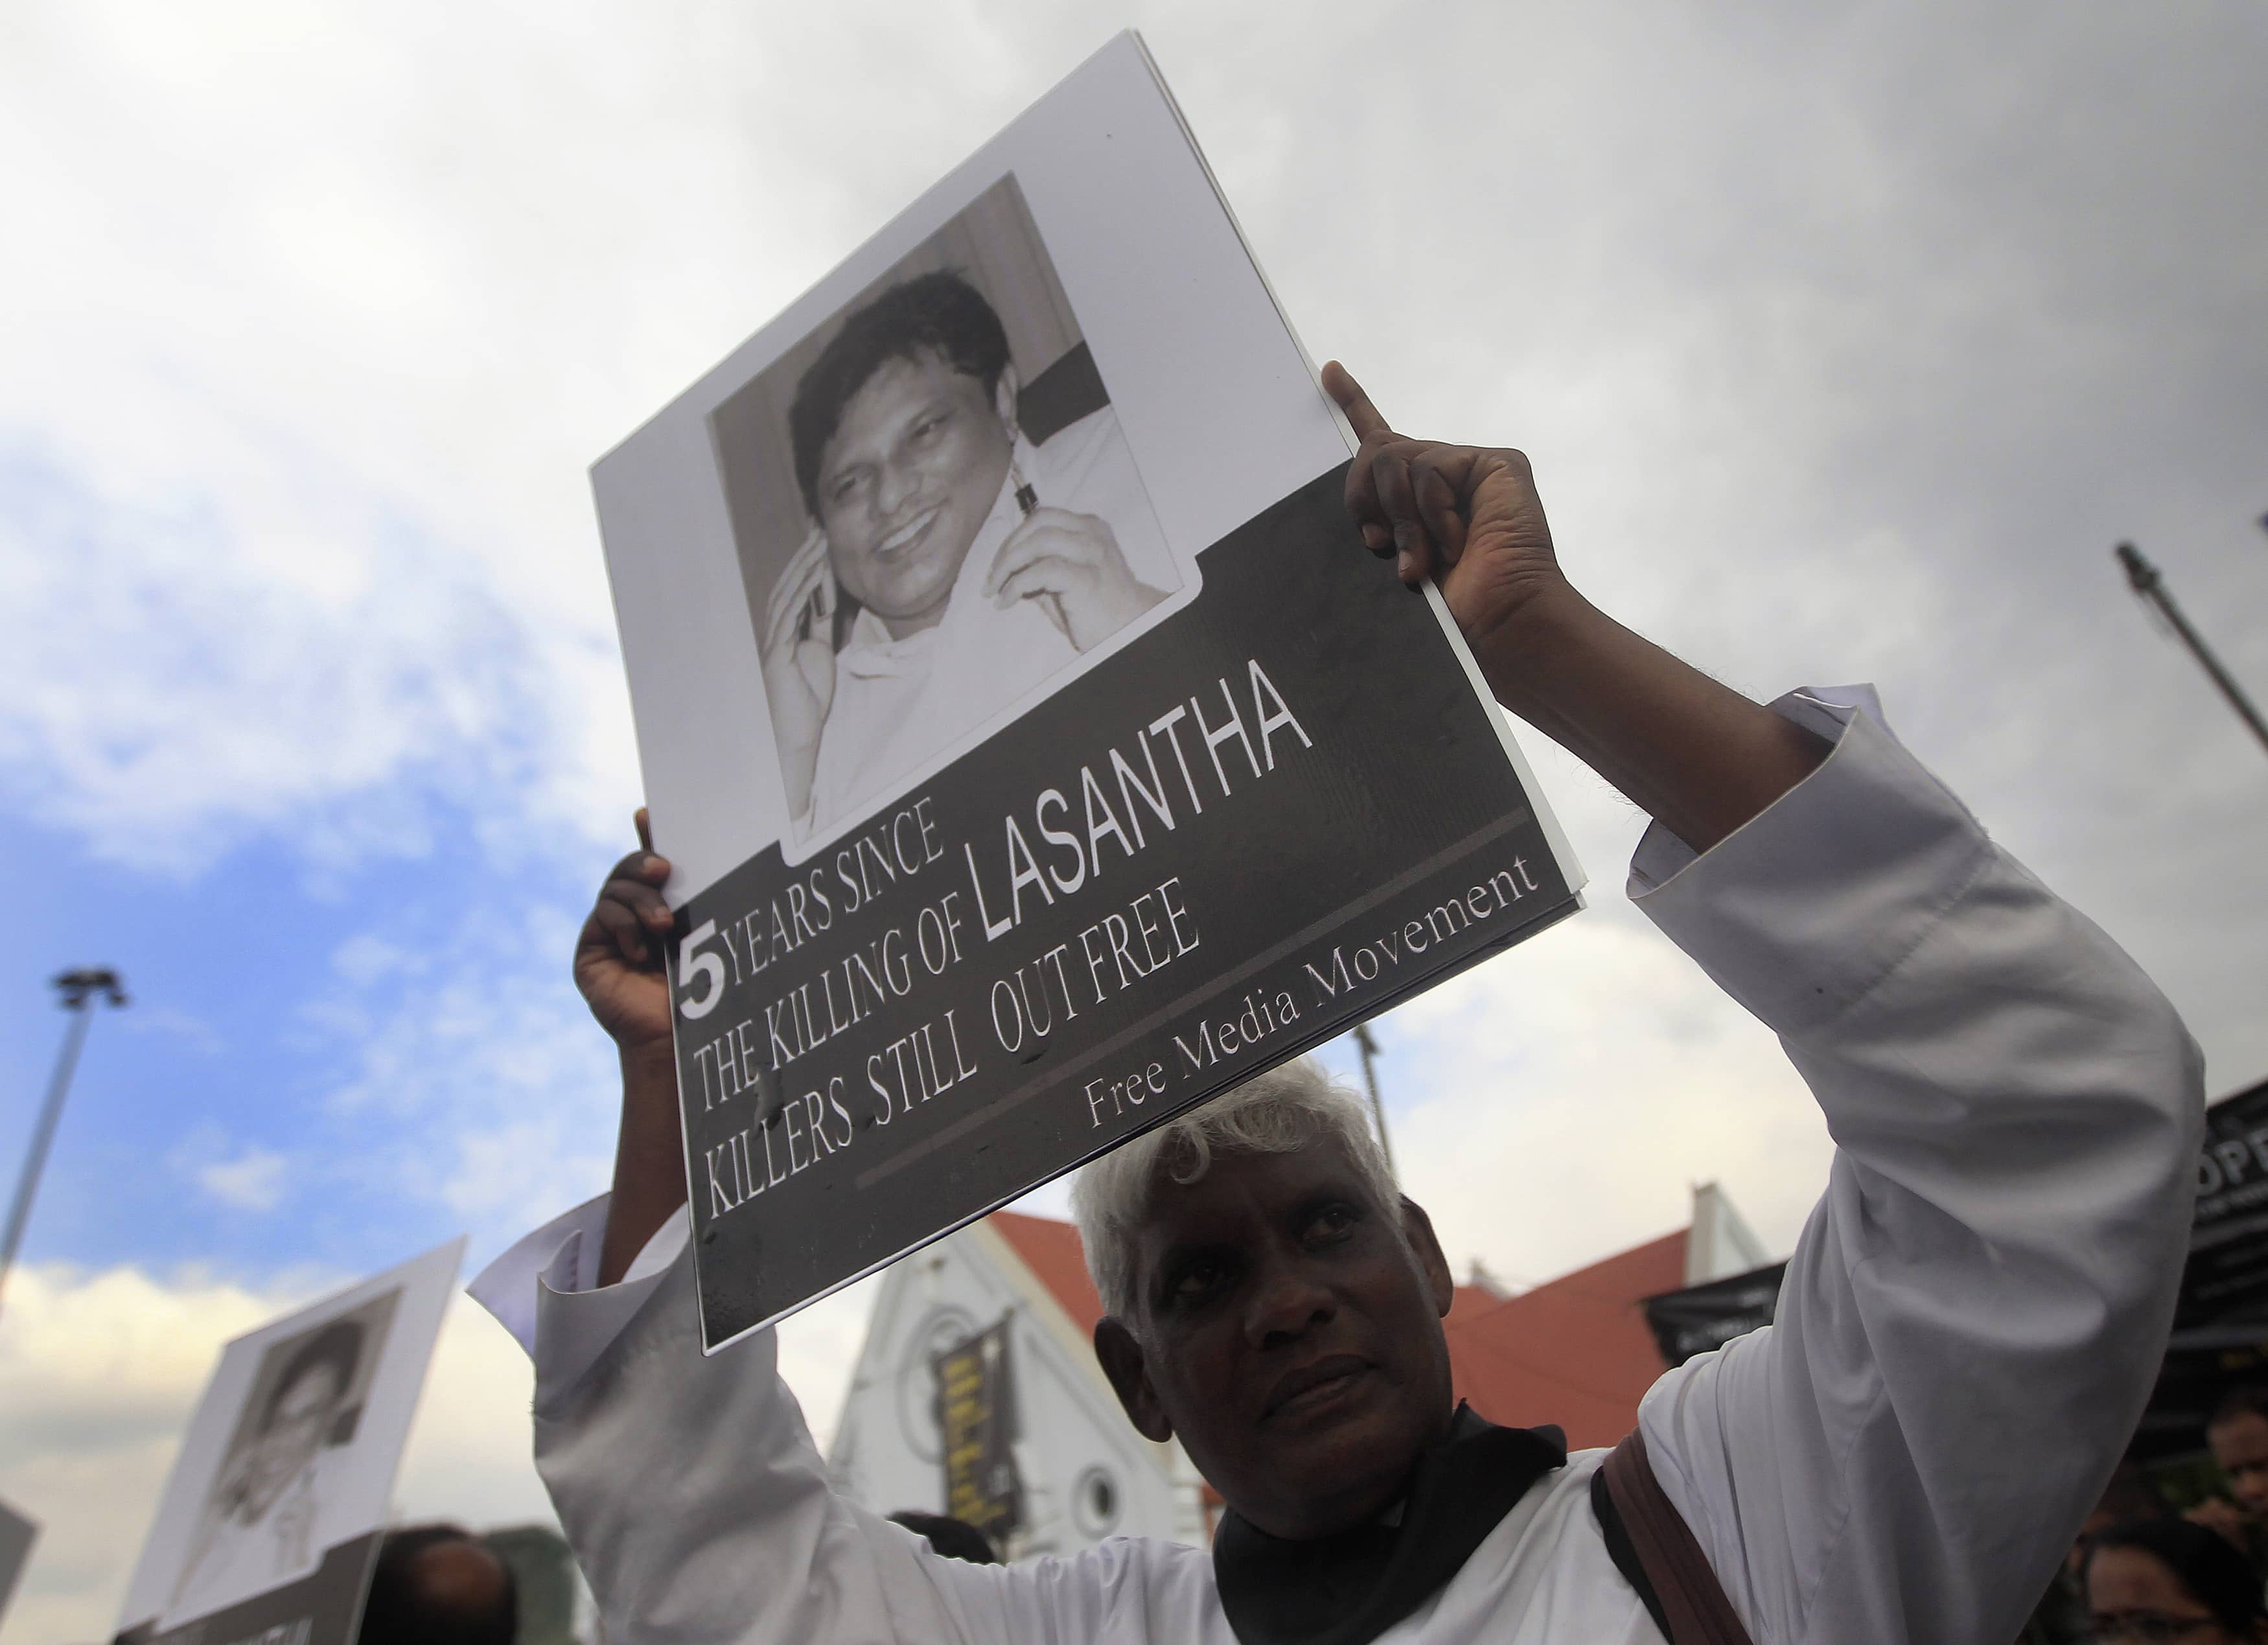 A Catholic priest holds up an image of journalist Lasantha Wickrematunge during a protest in Colombo, 28 January 2014, REUTERS/Dinuka Liyanawatte